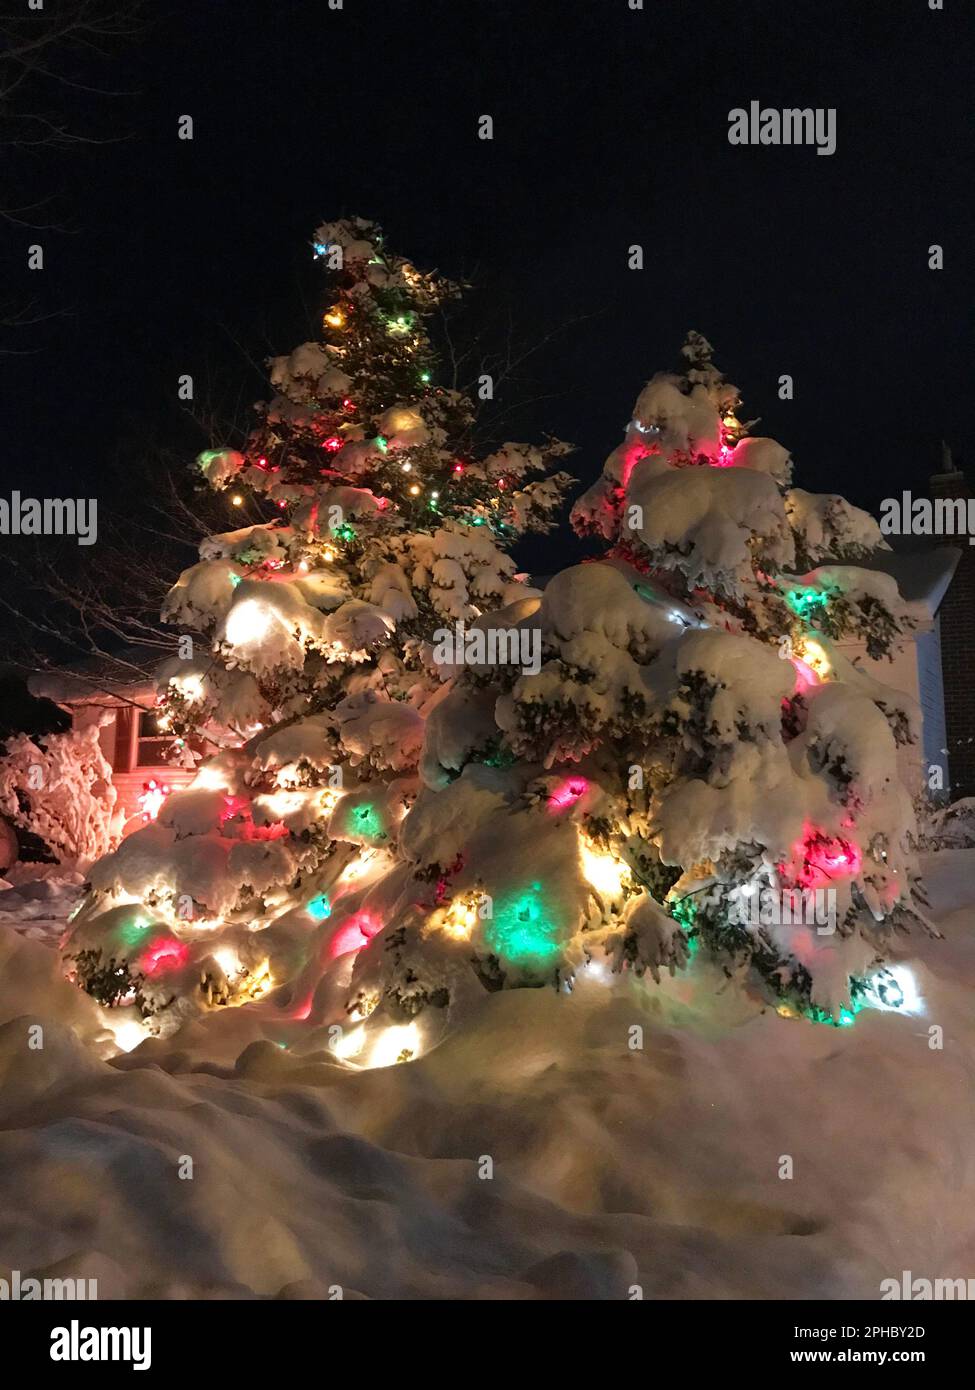 Two evergreen trees outdoors, decorated with Christmas lights and covered in a heavy layer of new fallen snow. Stock Photo